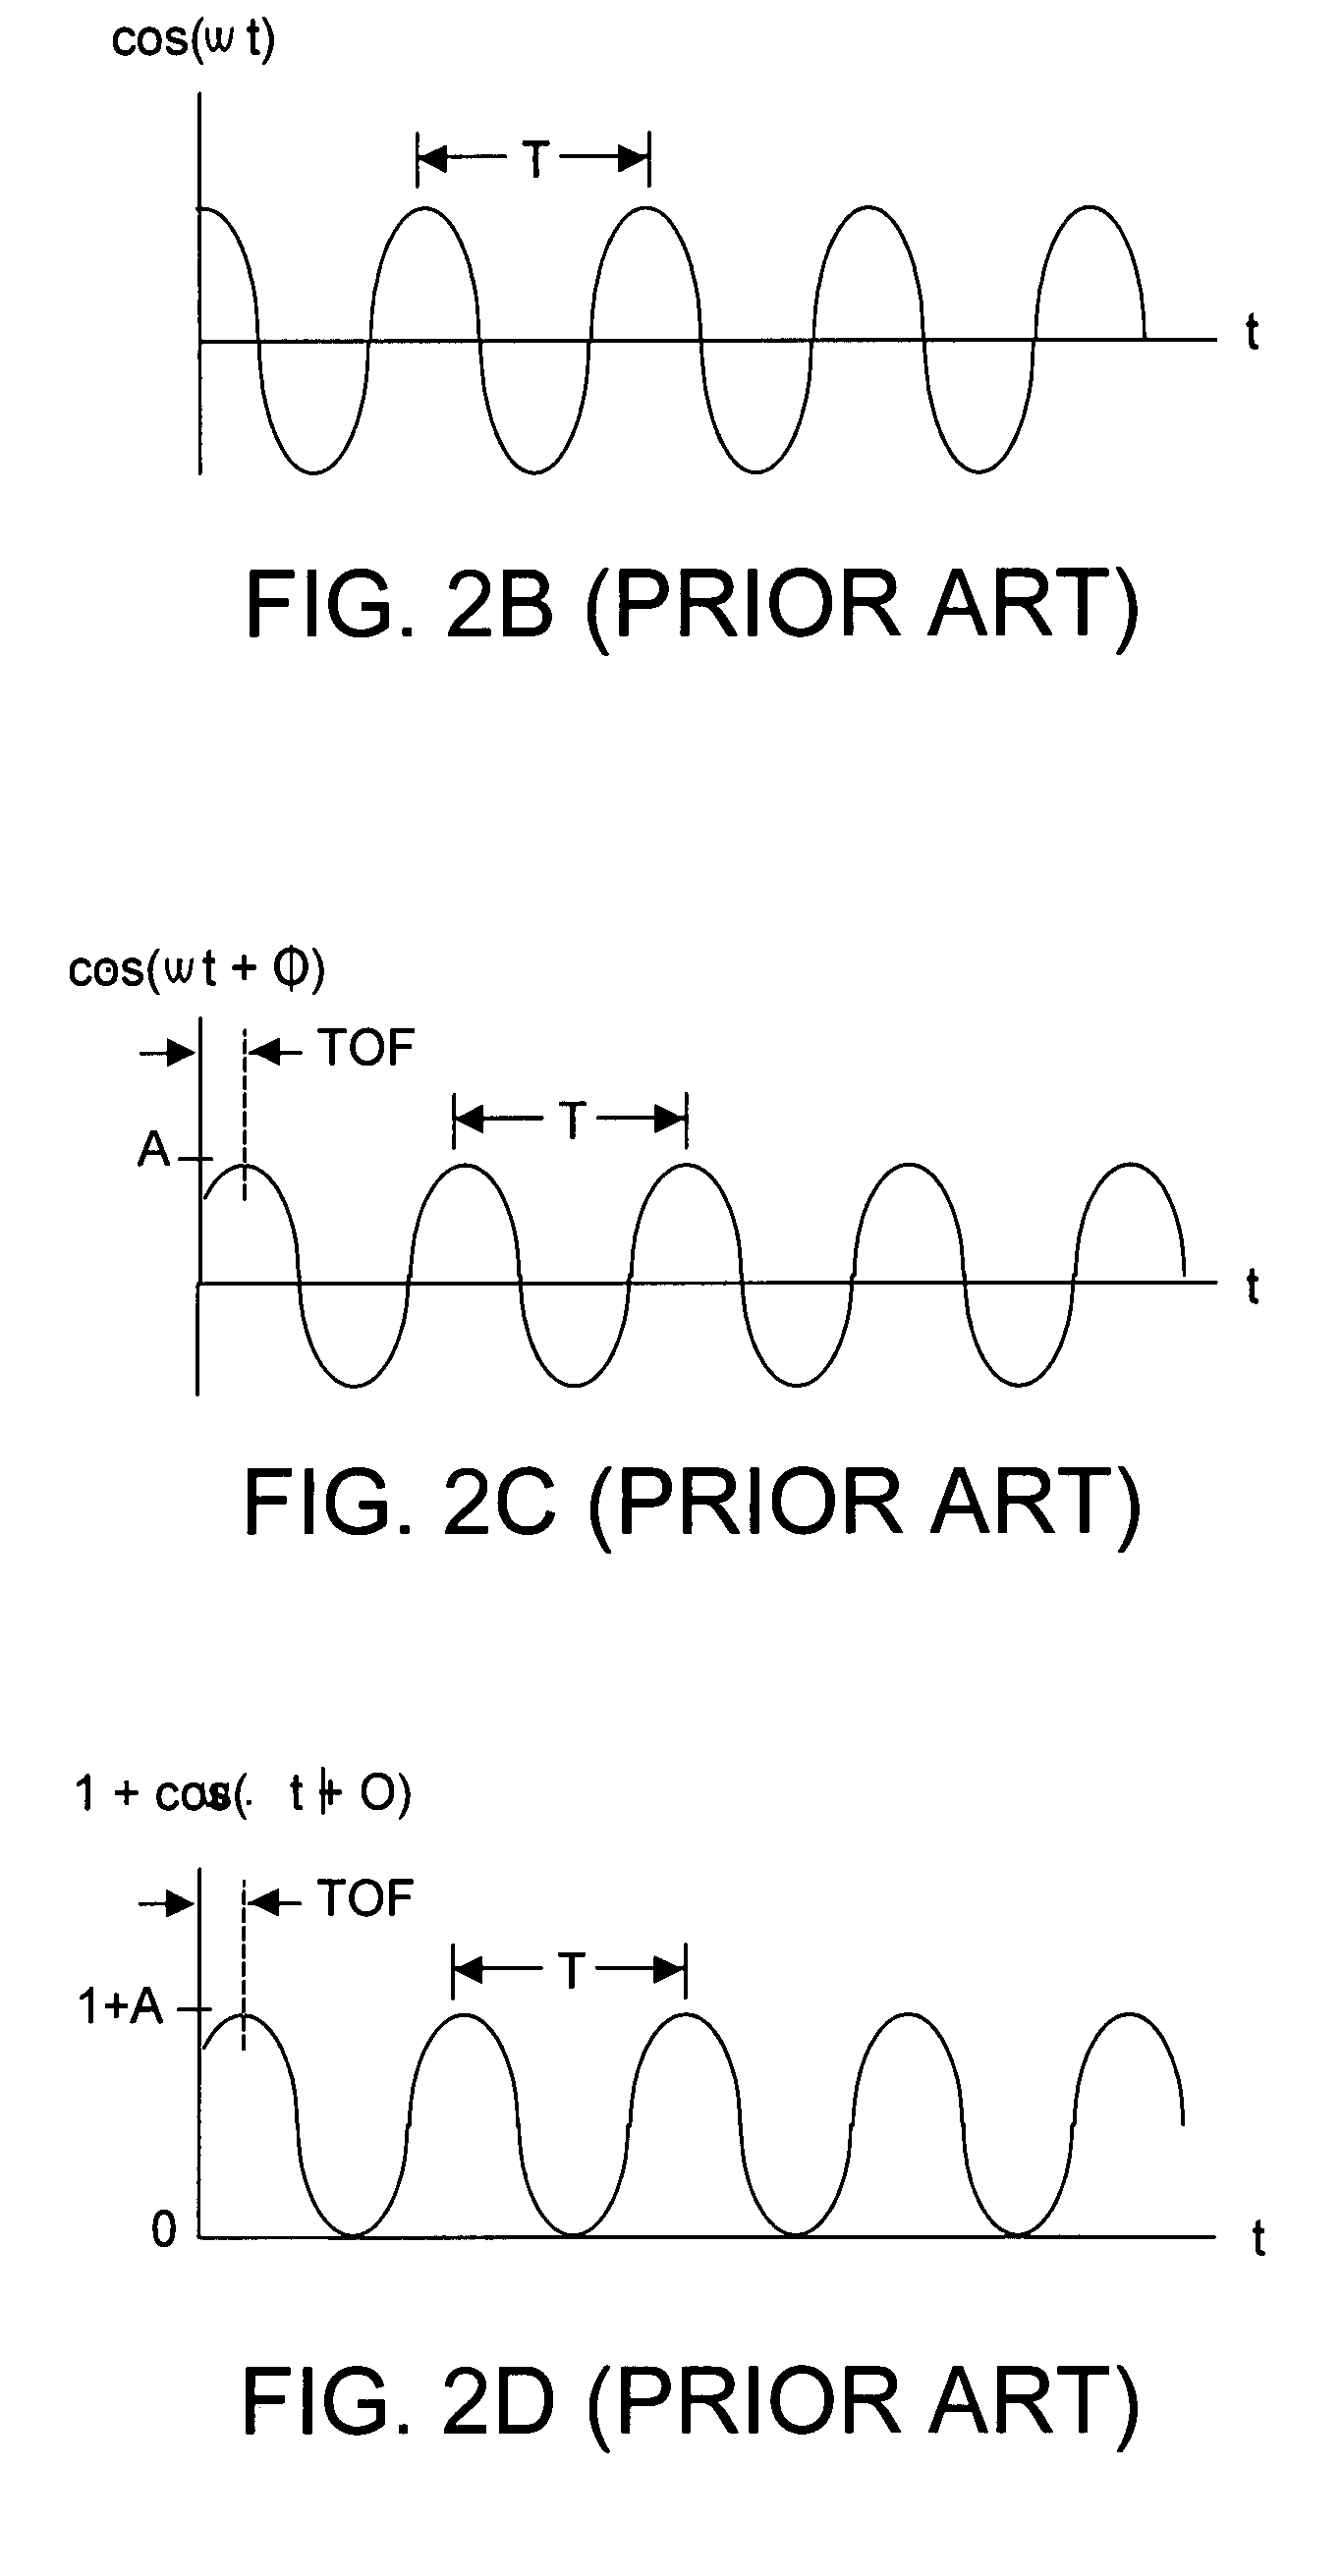 Method and system to correct motion blur and reduce signal transients in time-of-flight sensor systems